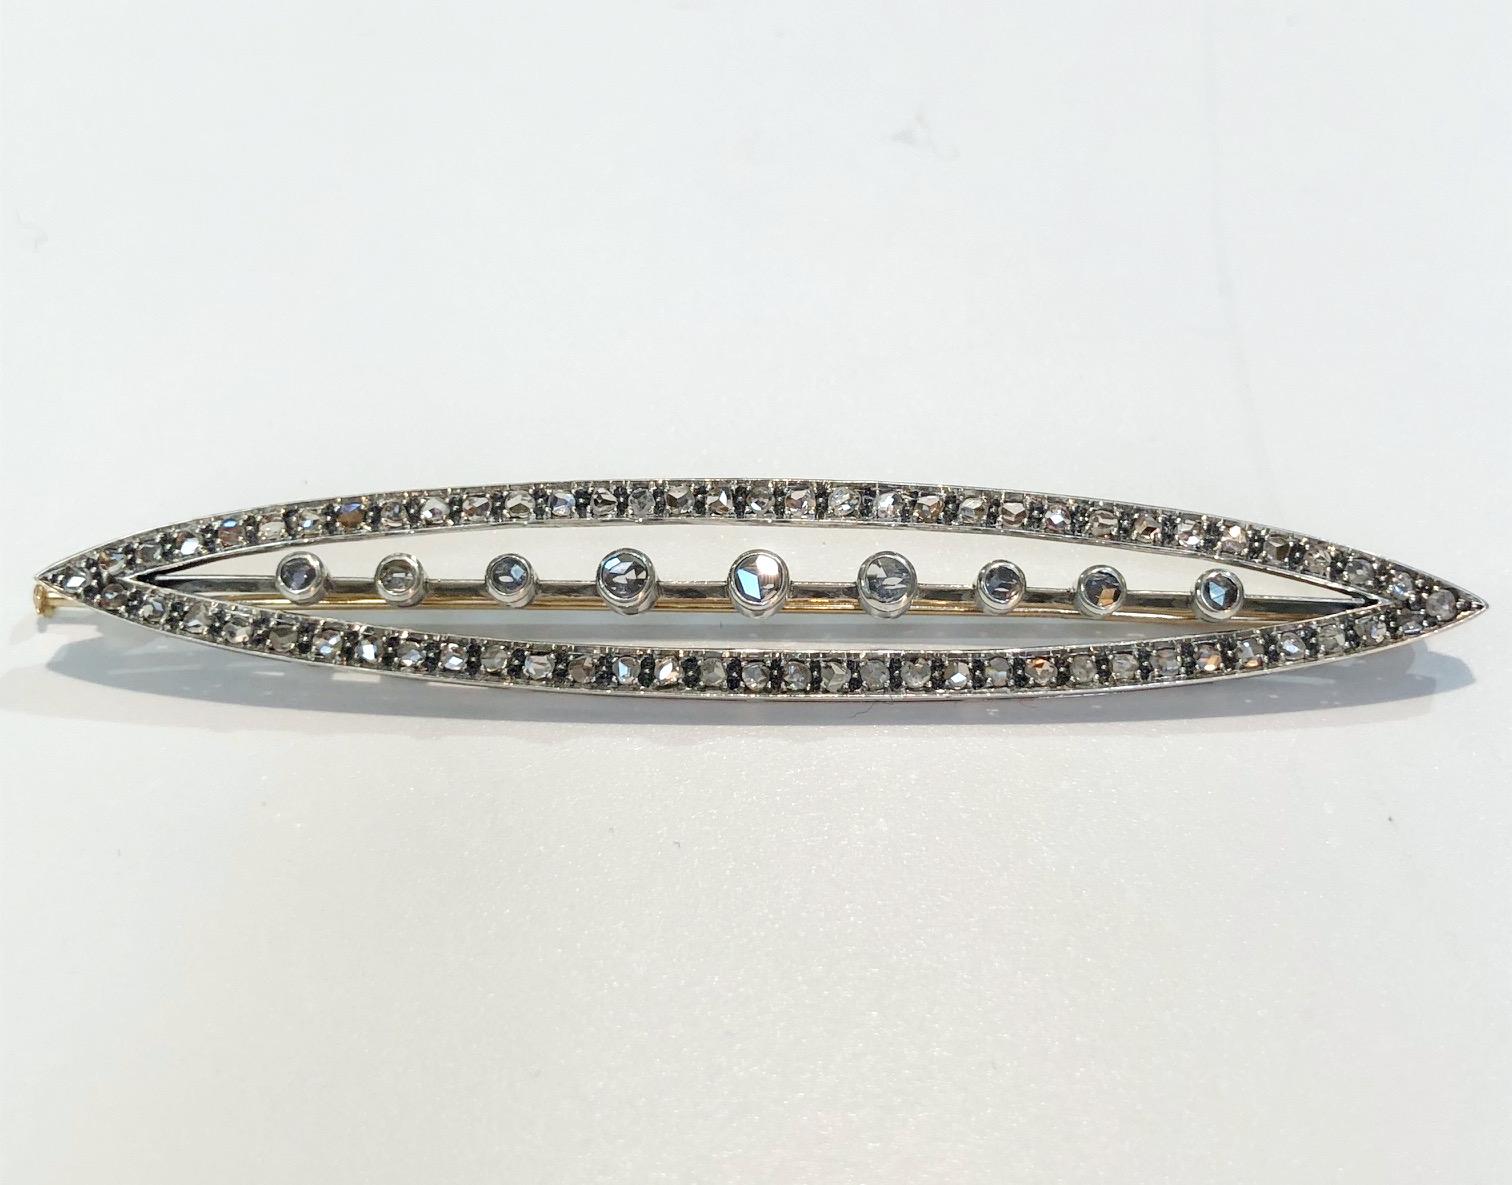 Vintage bar brooch with silver, gold, and diamonds, Italy circa late 1800s 
Length 8 cm
Width 1.7 cm